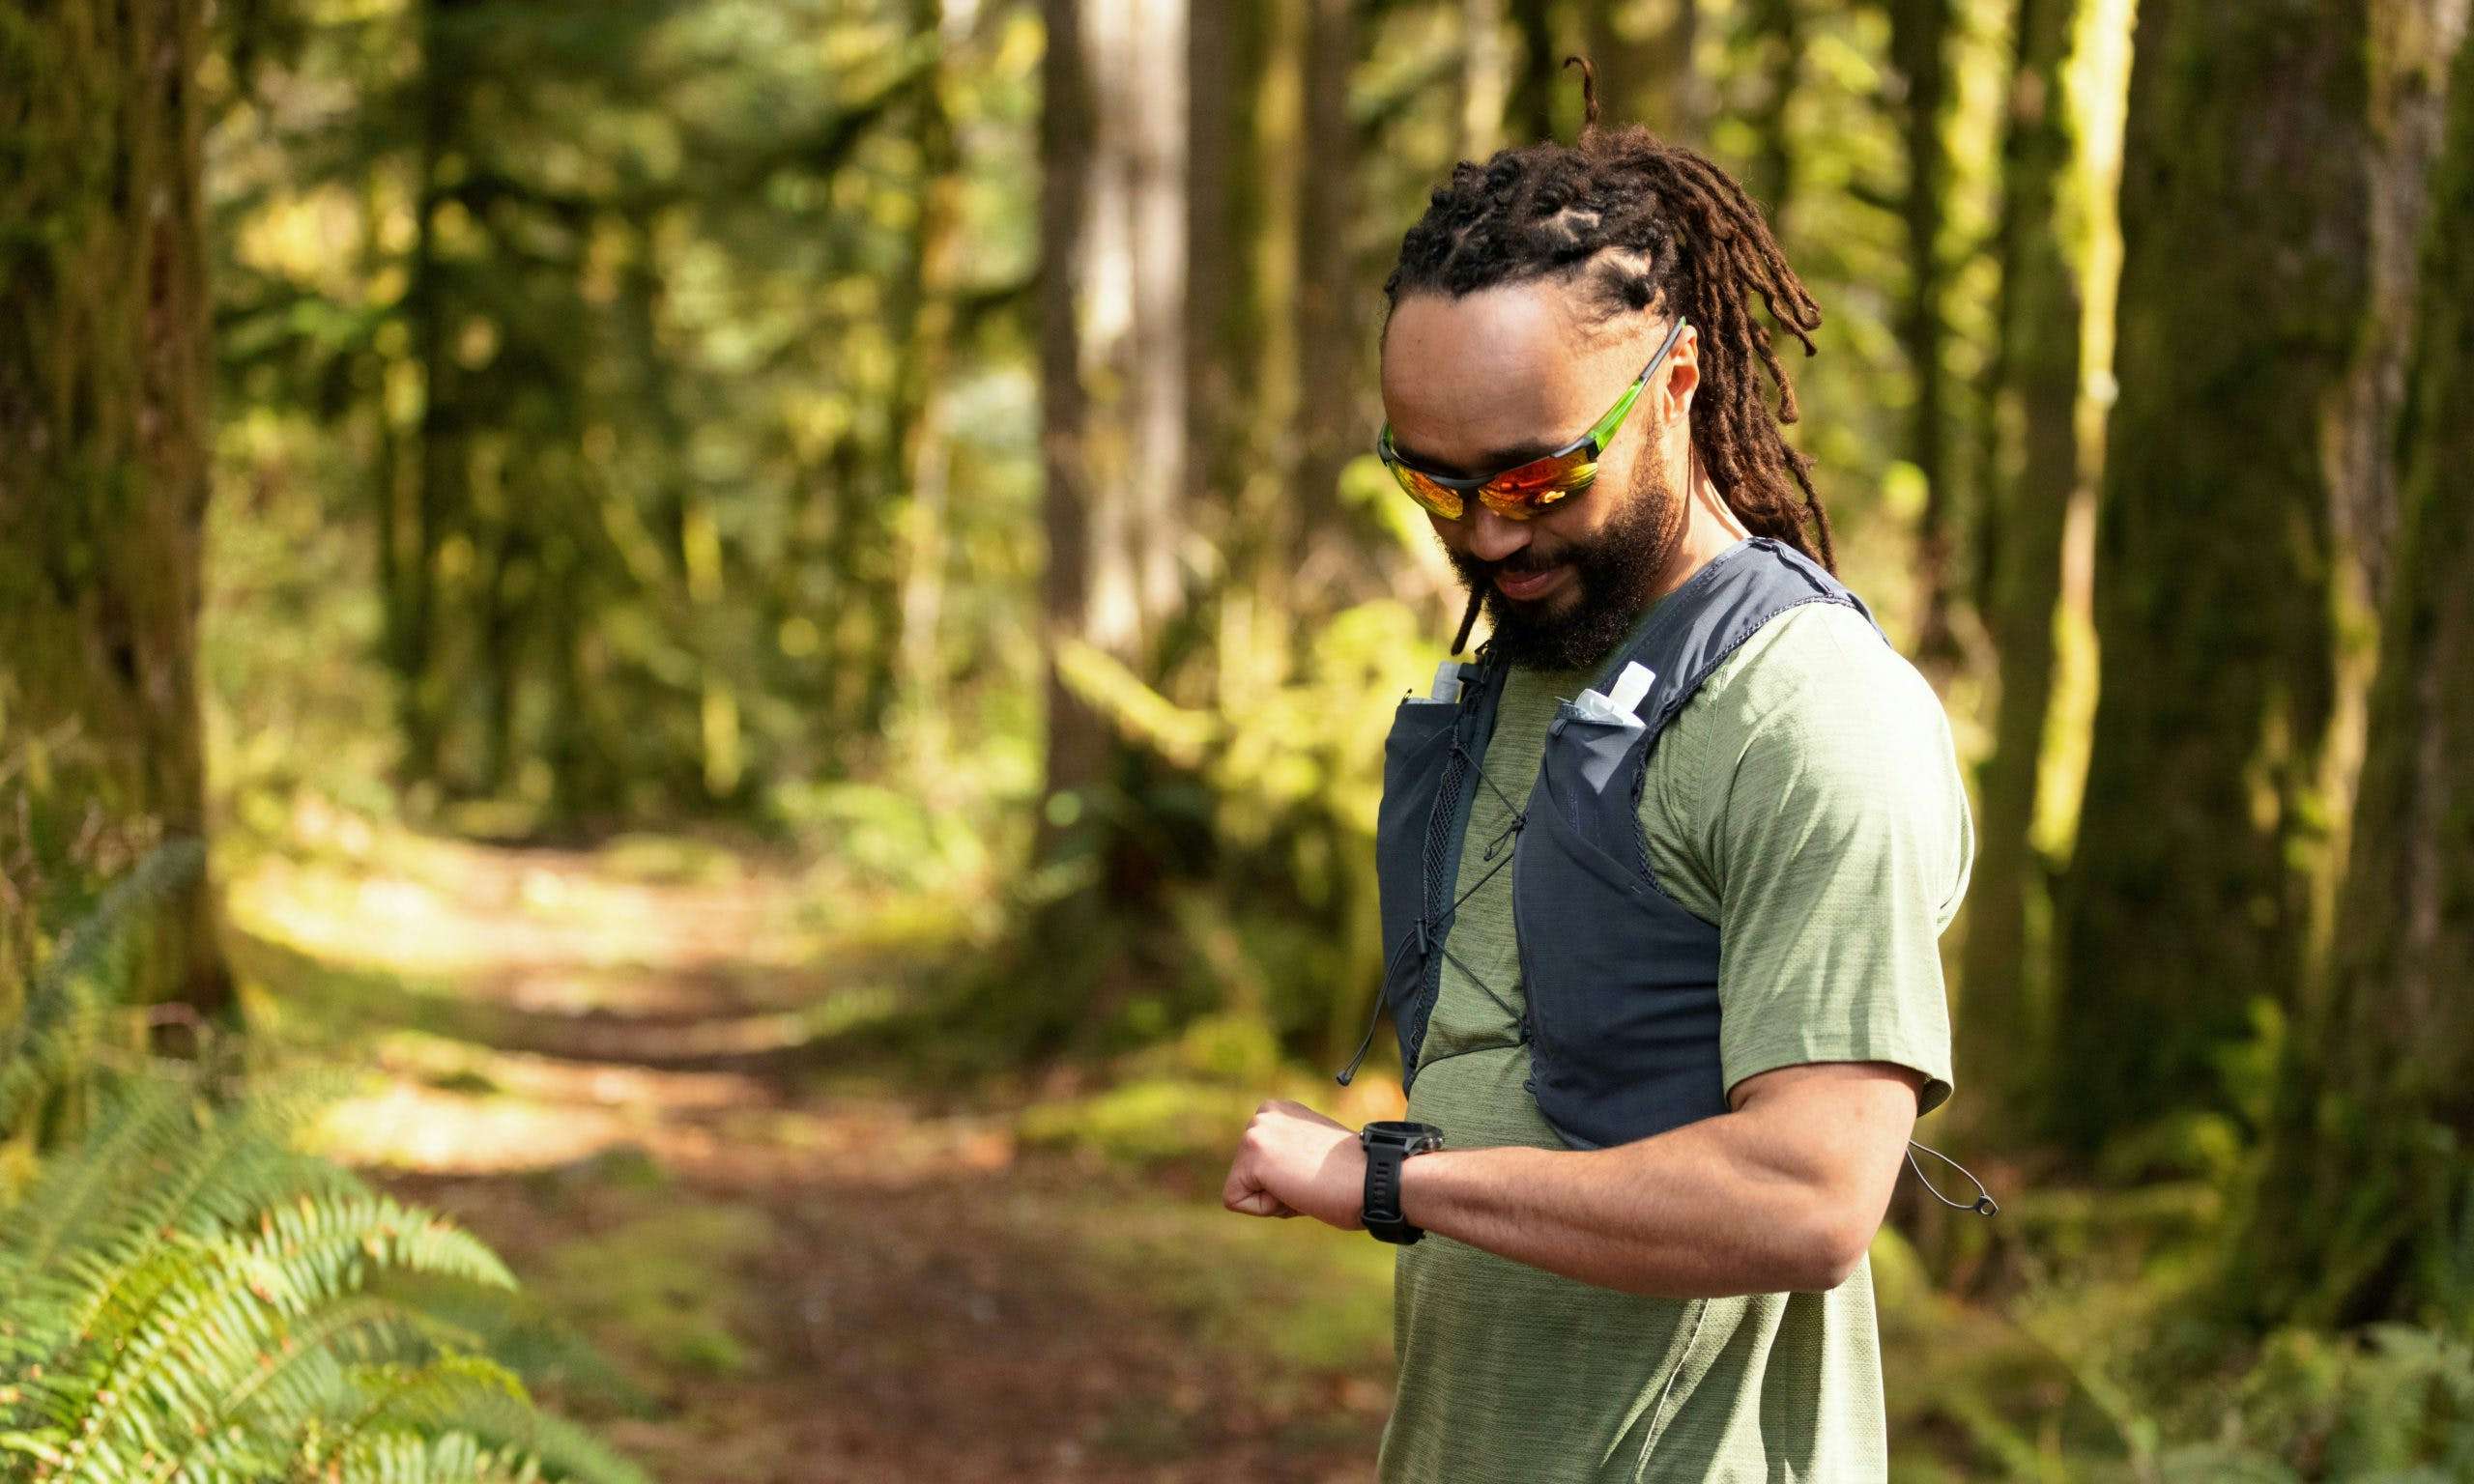 Trail runner wearing a pack and looking at their watch in the forest